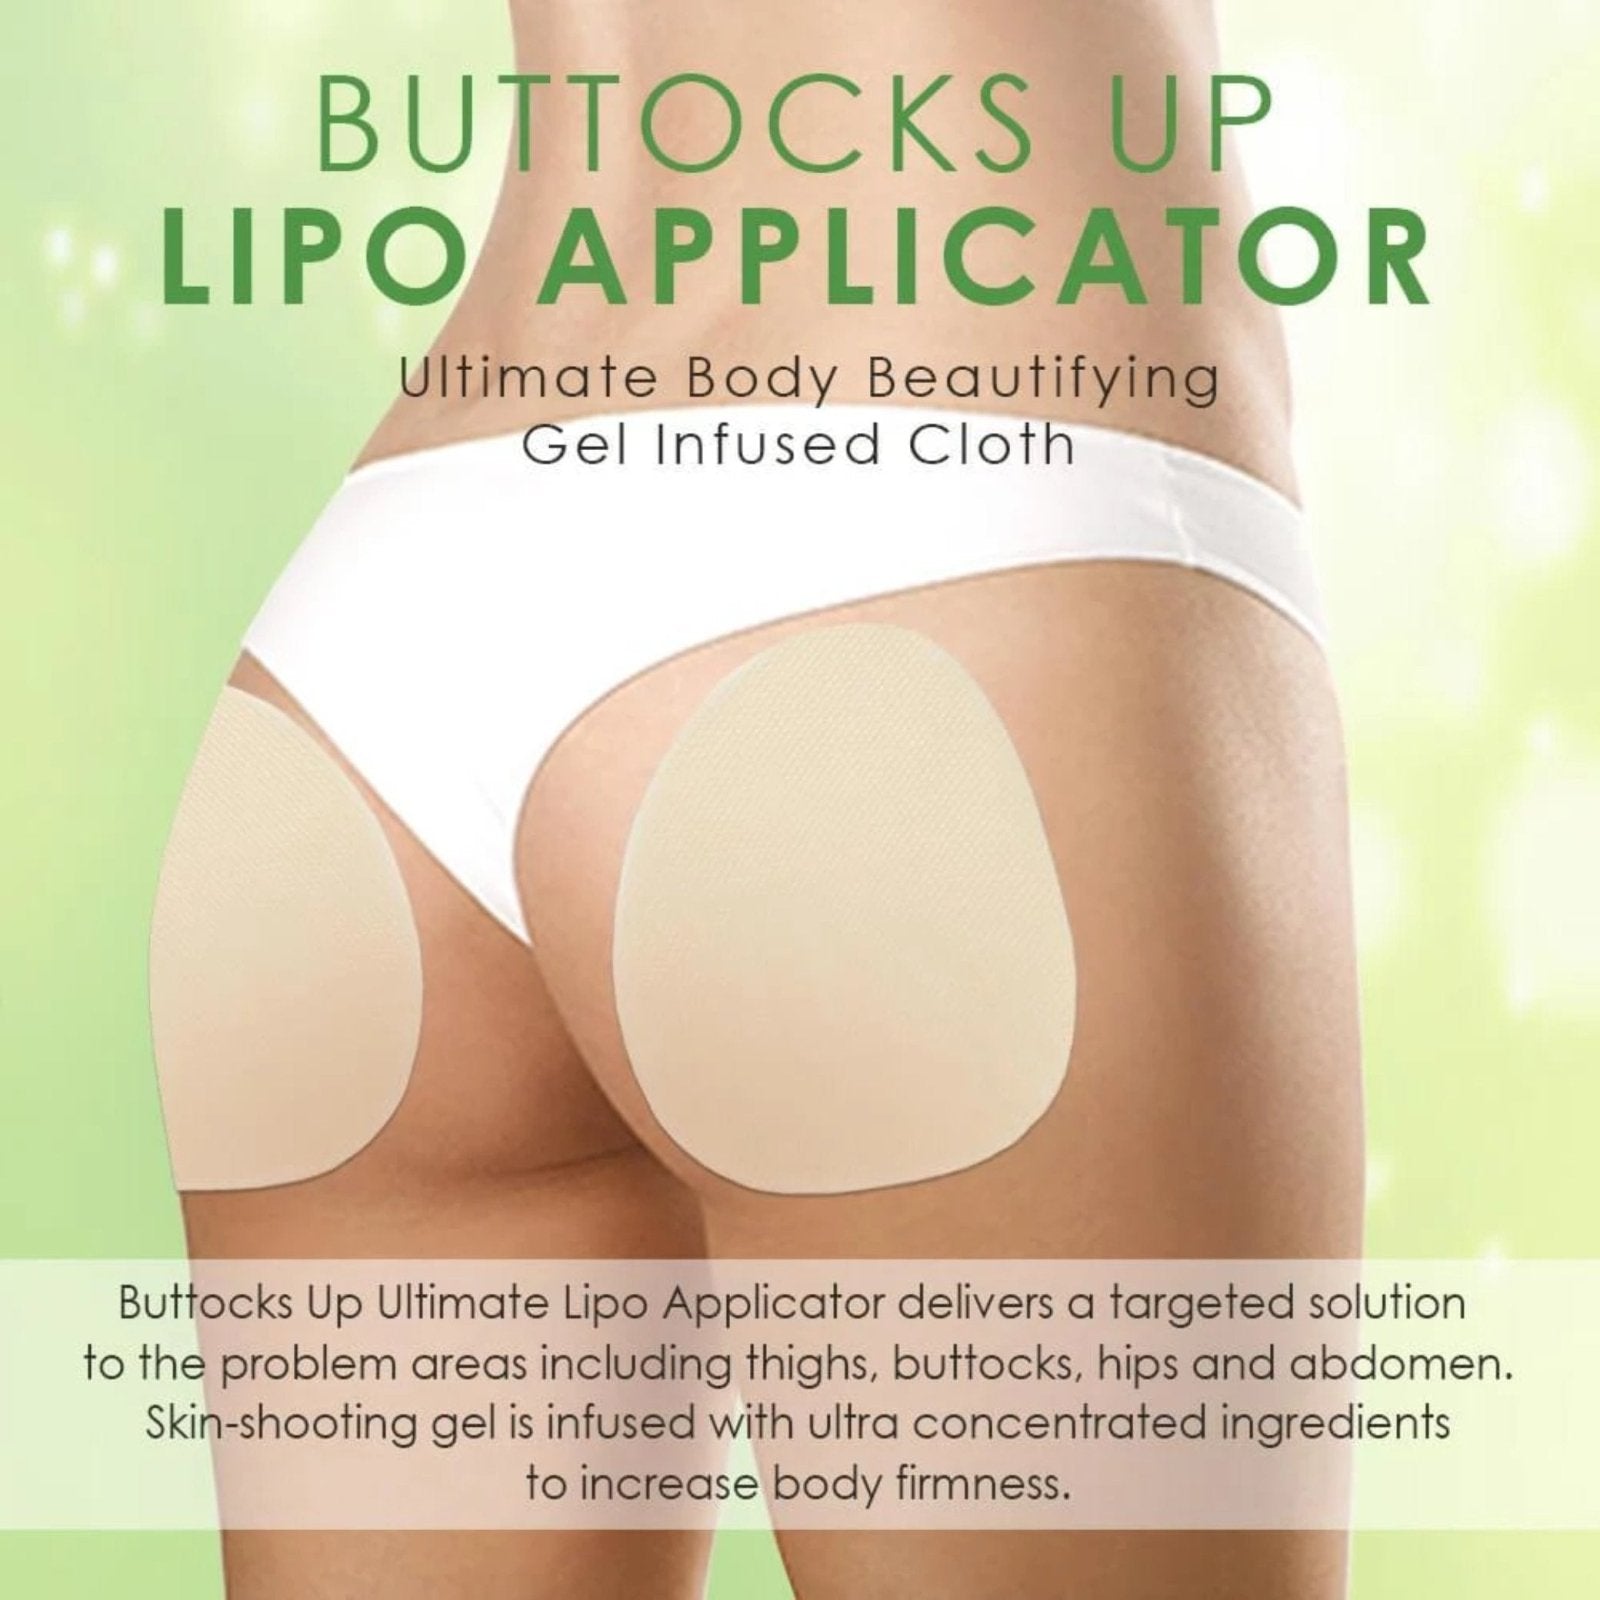 Buttock Hip Up Lift Gel & Lipo Applicator (Gel 150ml + Patches 6 pairs) - Medactiveshop